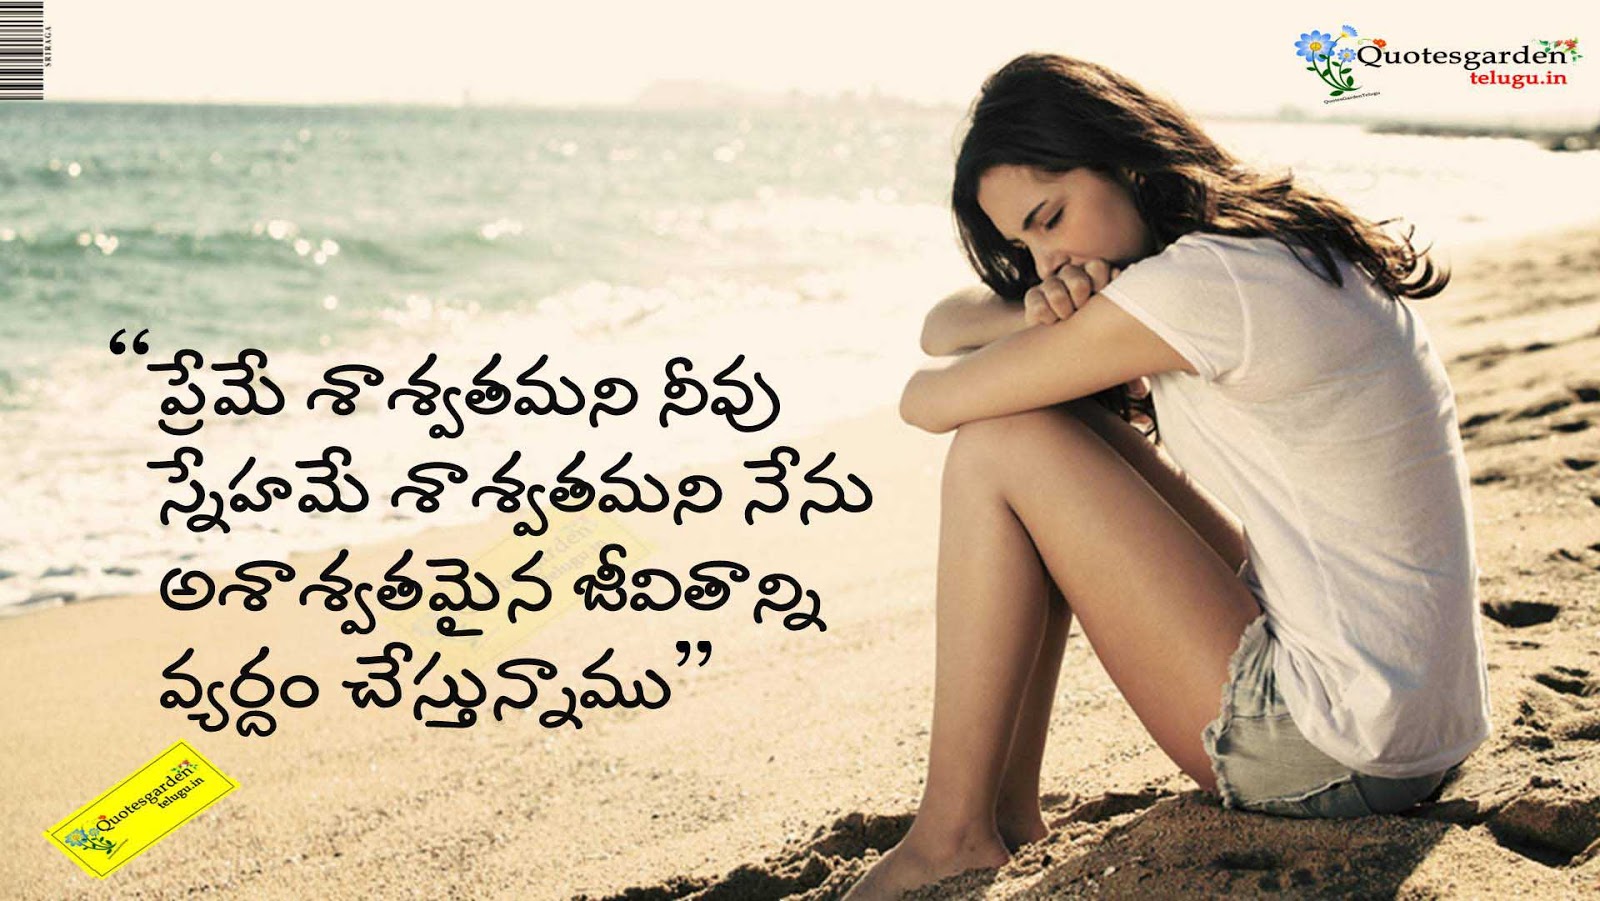 Heart touching sad love friendship quotes 736 | QUOTES GARDEN ...